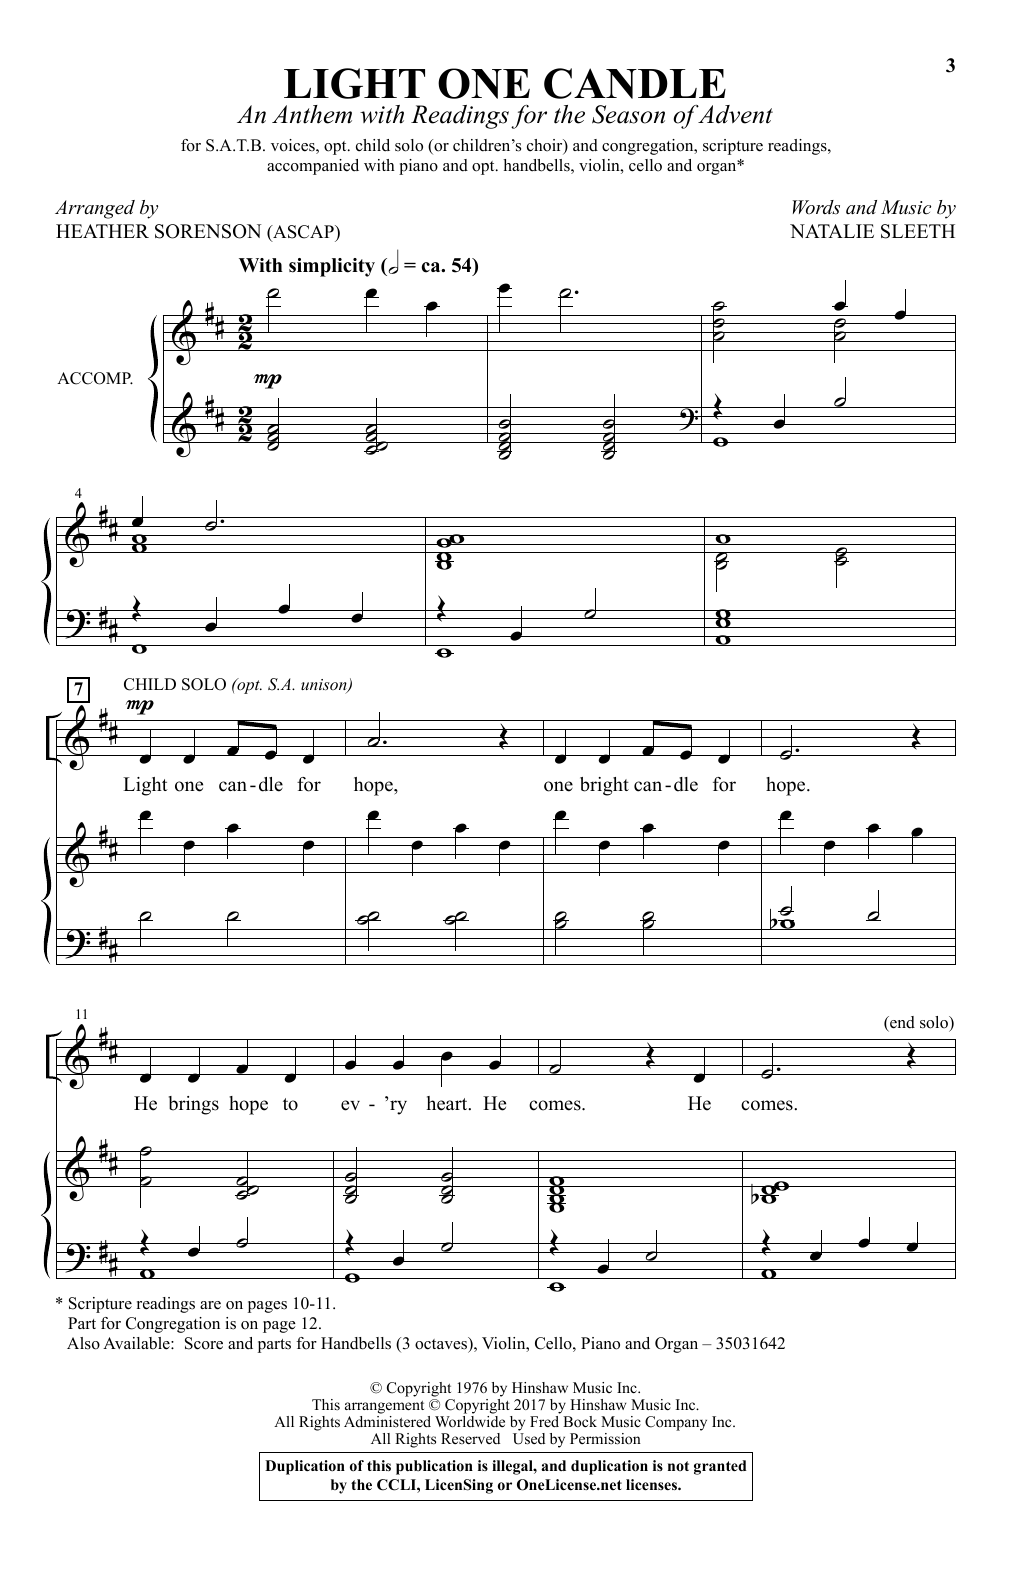 Download Heather Sorenson Light One Candle Sheet Music